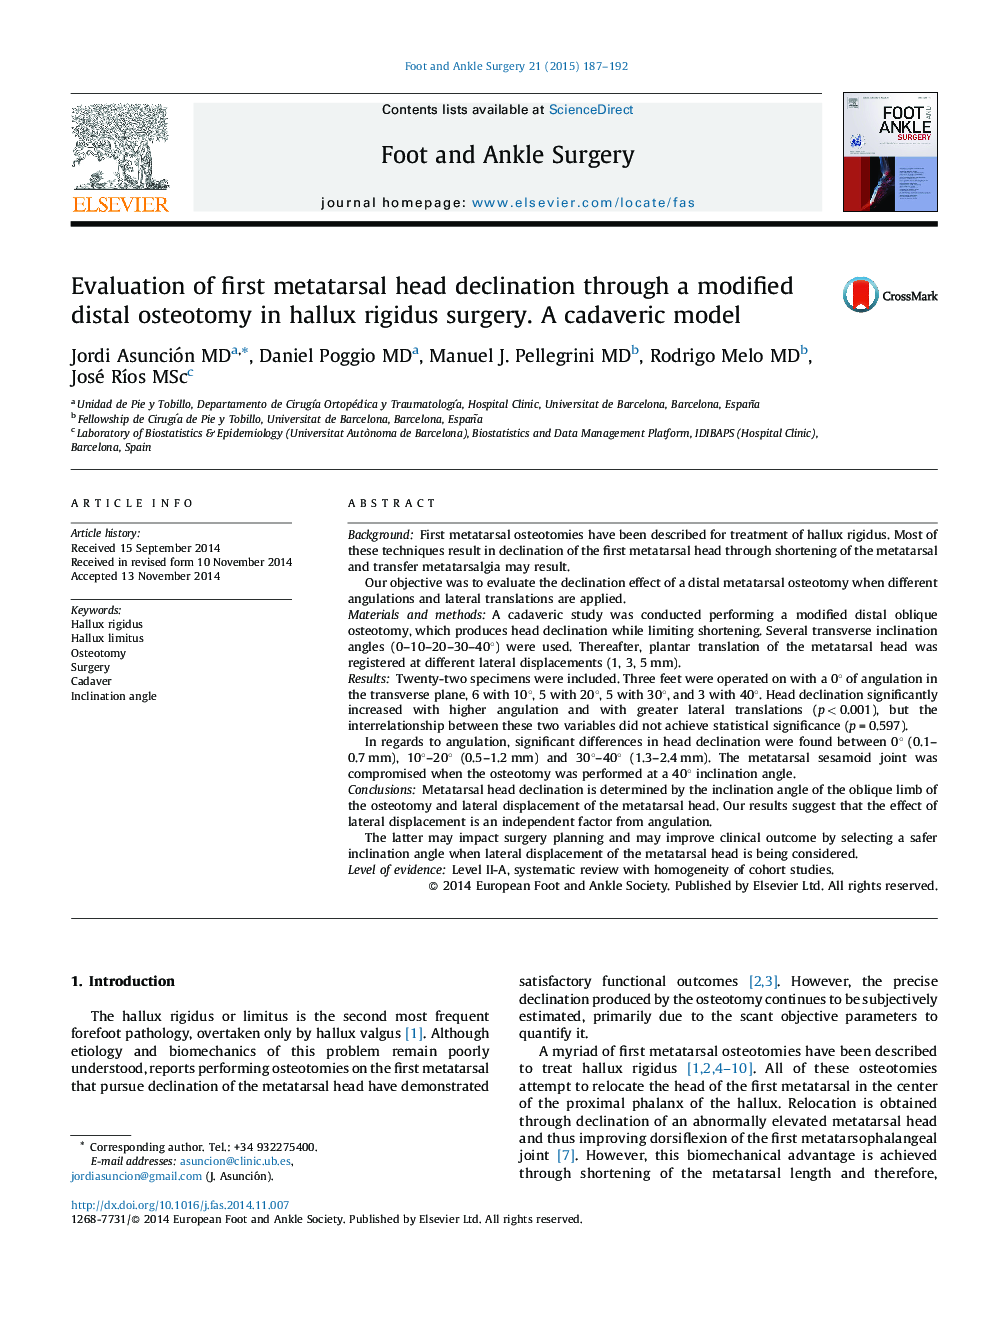 Evaluation of first metatarsal head declination through a modified distal osteotomy in hallux rigidus surgery. A cadaveric model